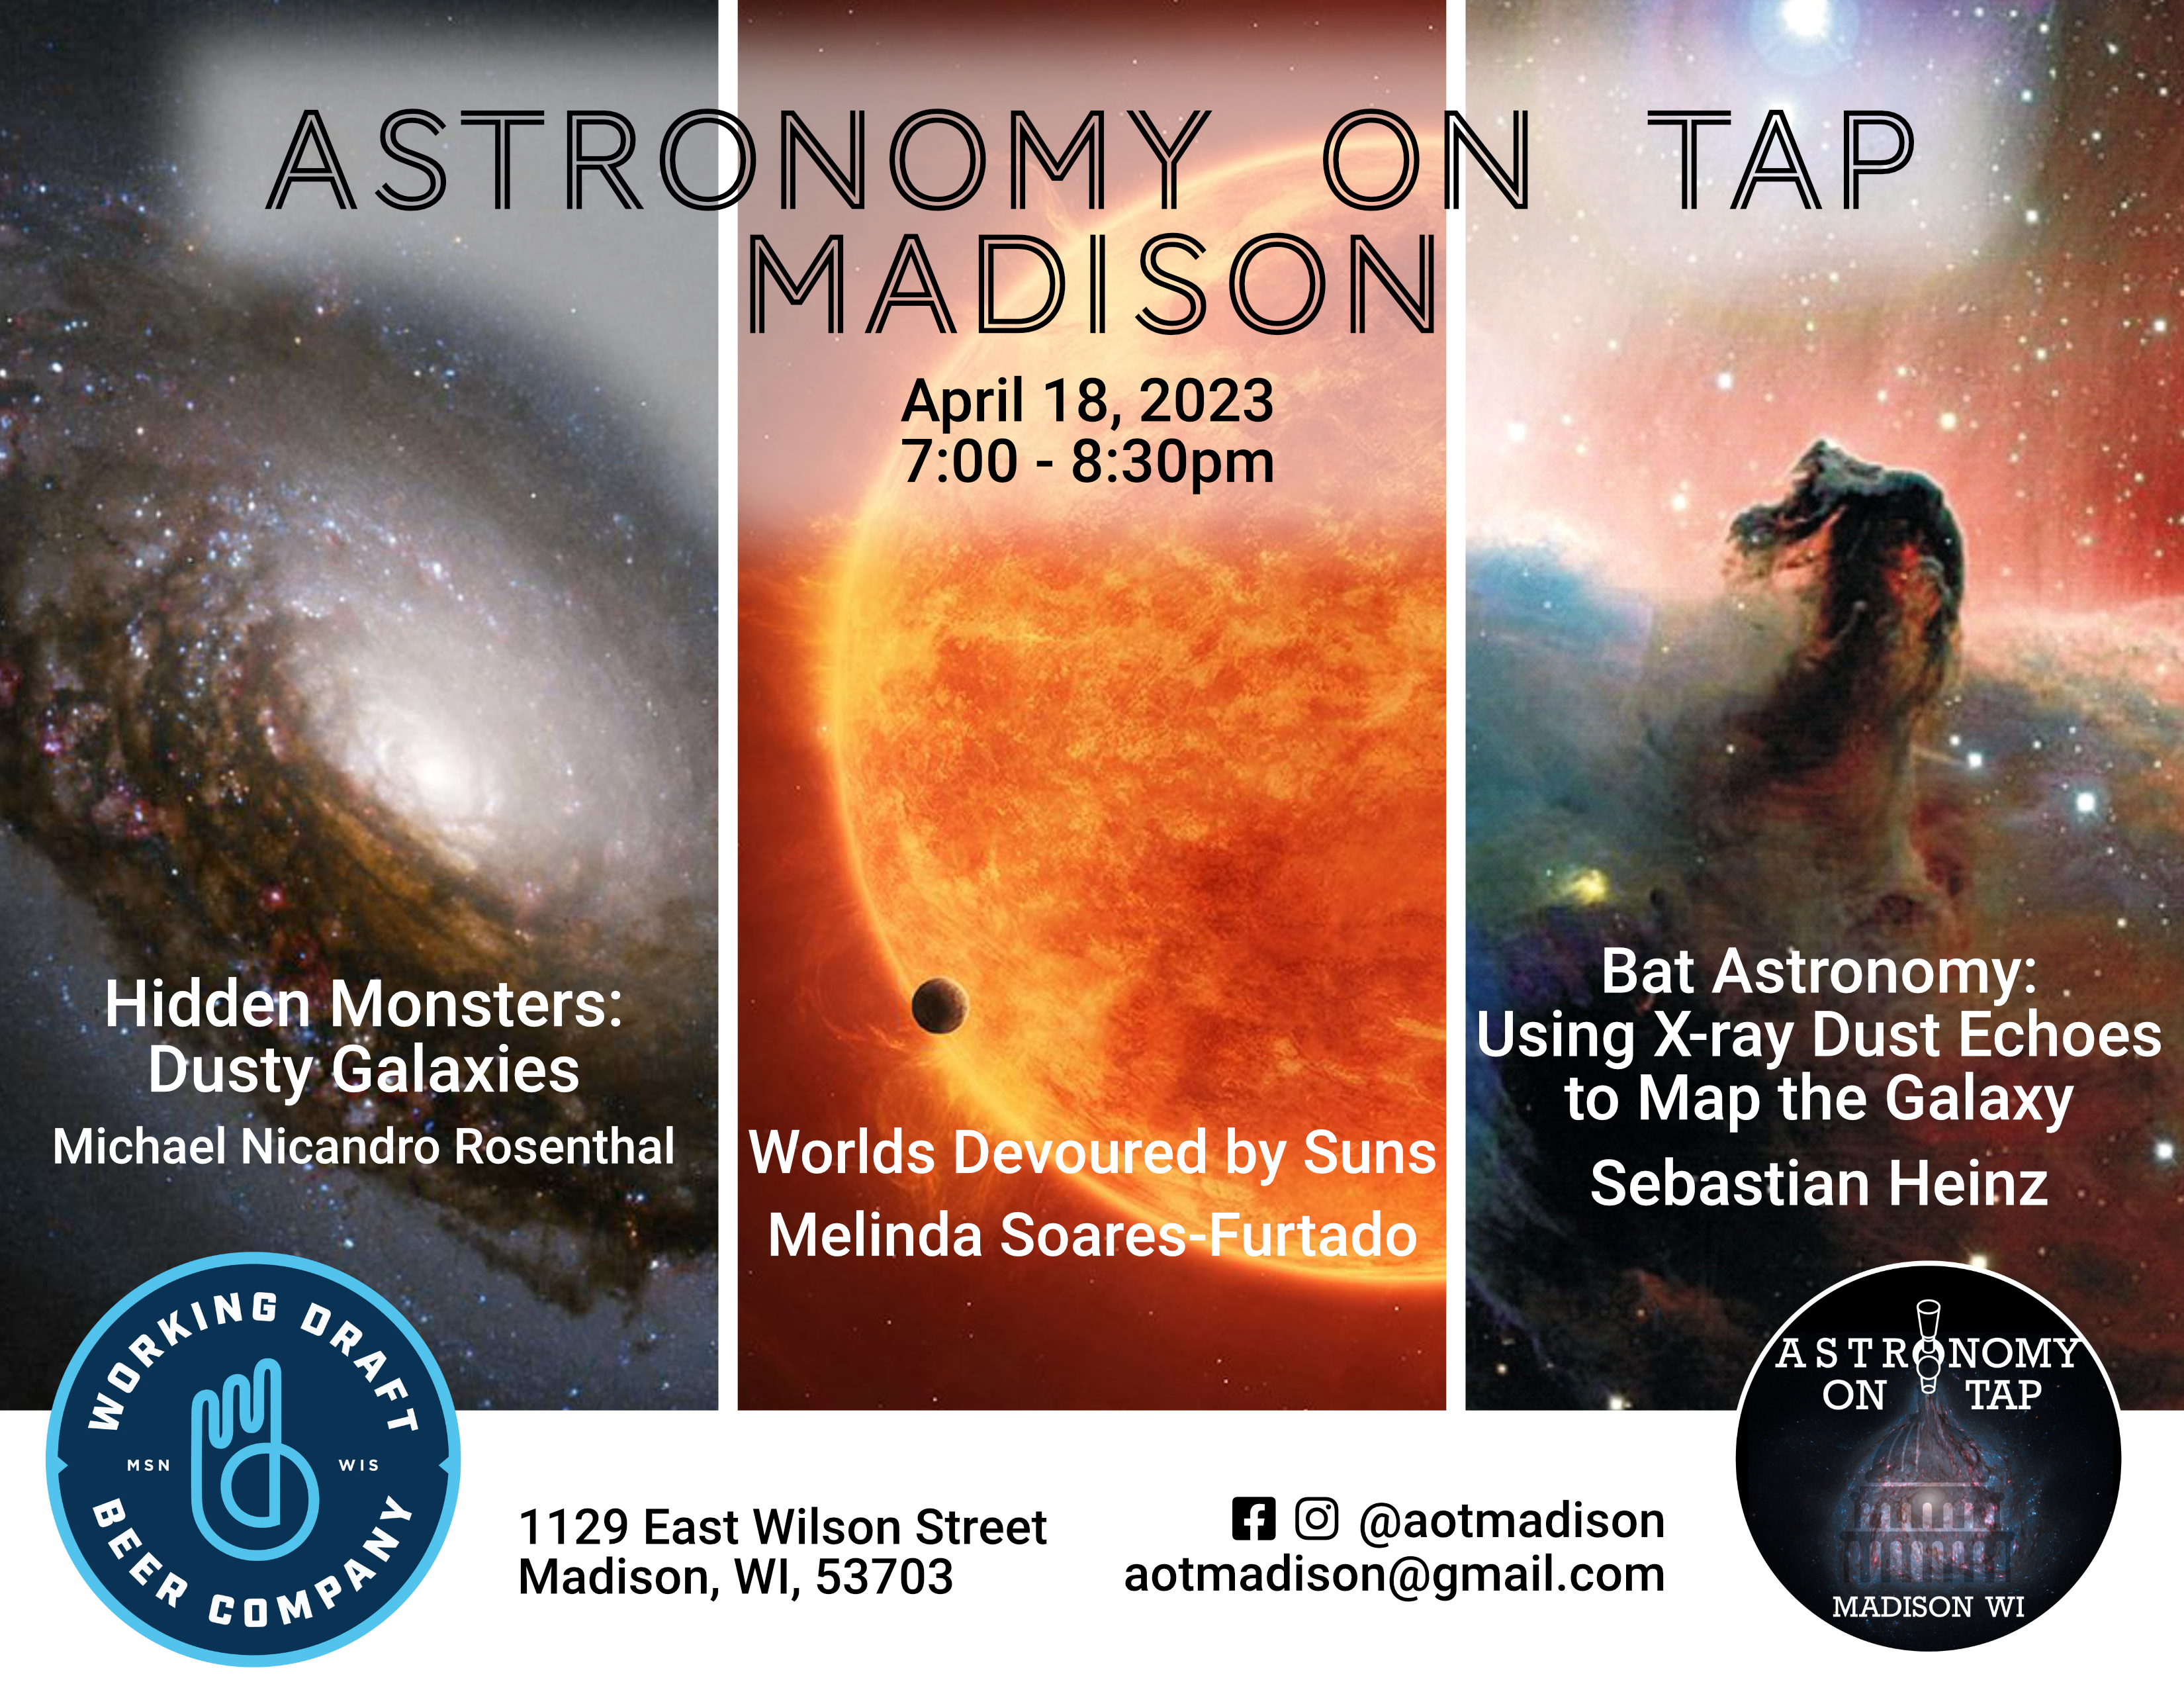 Title: Astronomy on Tap Madison April 18th, 2023 7-8:30pm at the top of the image Background shows a star with whispy emission in ultra violet light colored in green red and blue for different high energy wavelengths. At bottom is the Working Draft Beer Company logo and the AoT Madison logo.